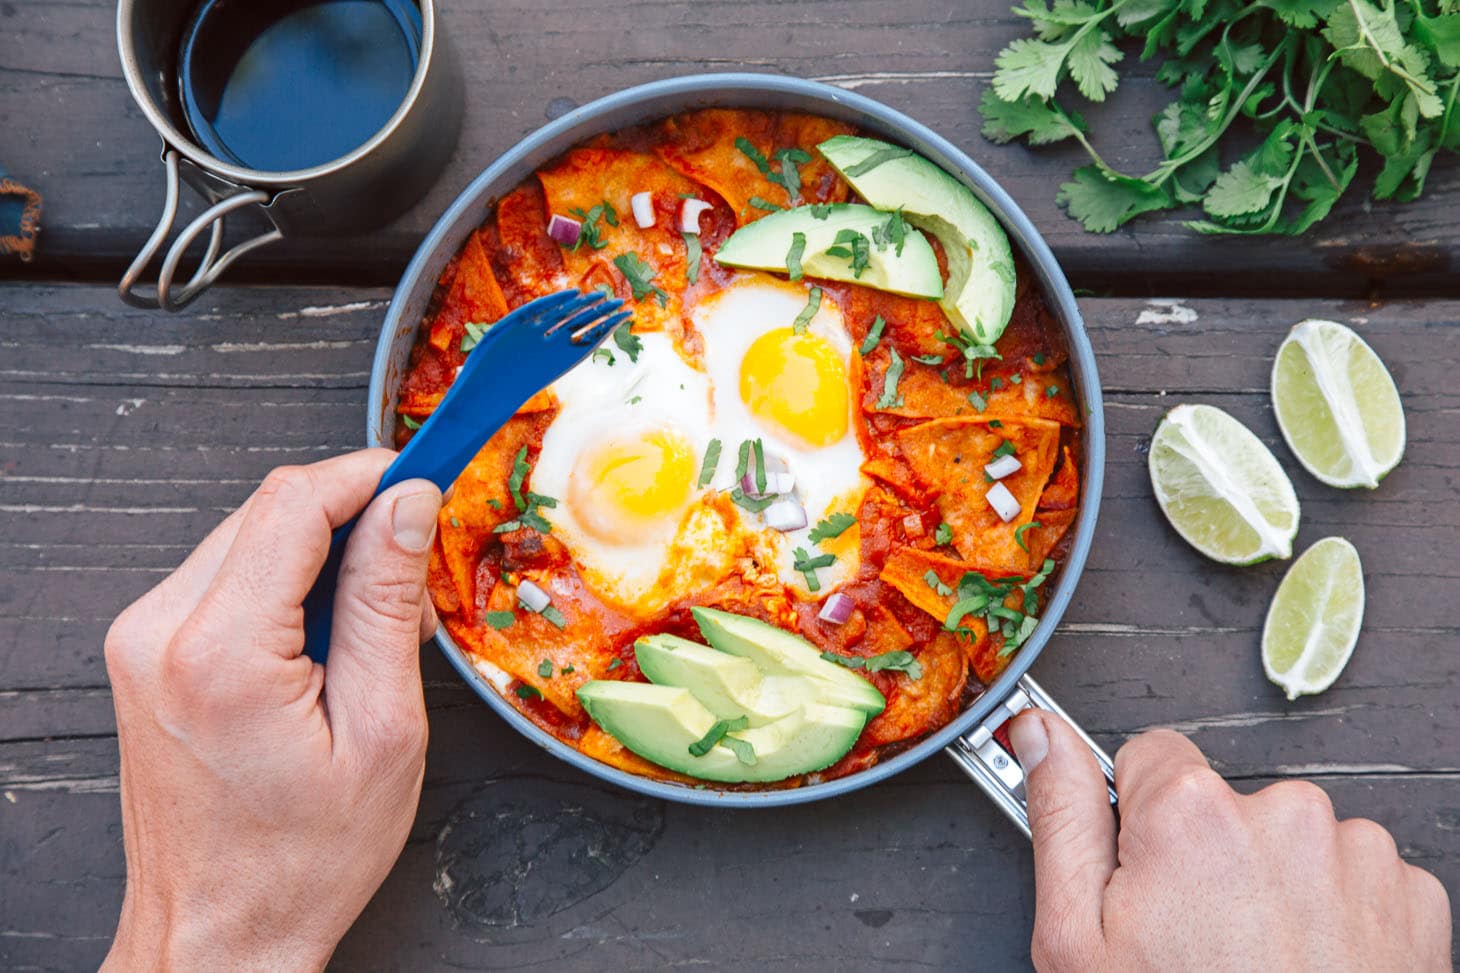 Overhead view of a skillet of chilaquiles with two eggs and avocados. A hand with a fork is in frame.